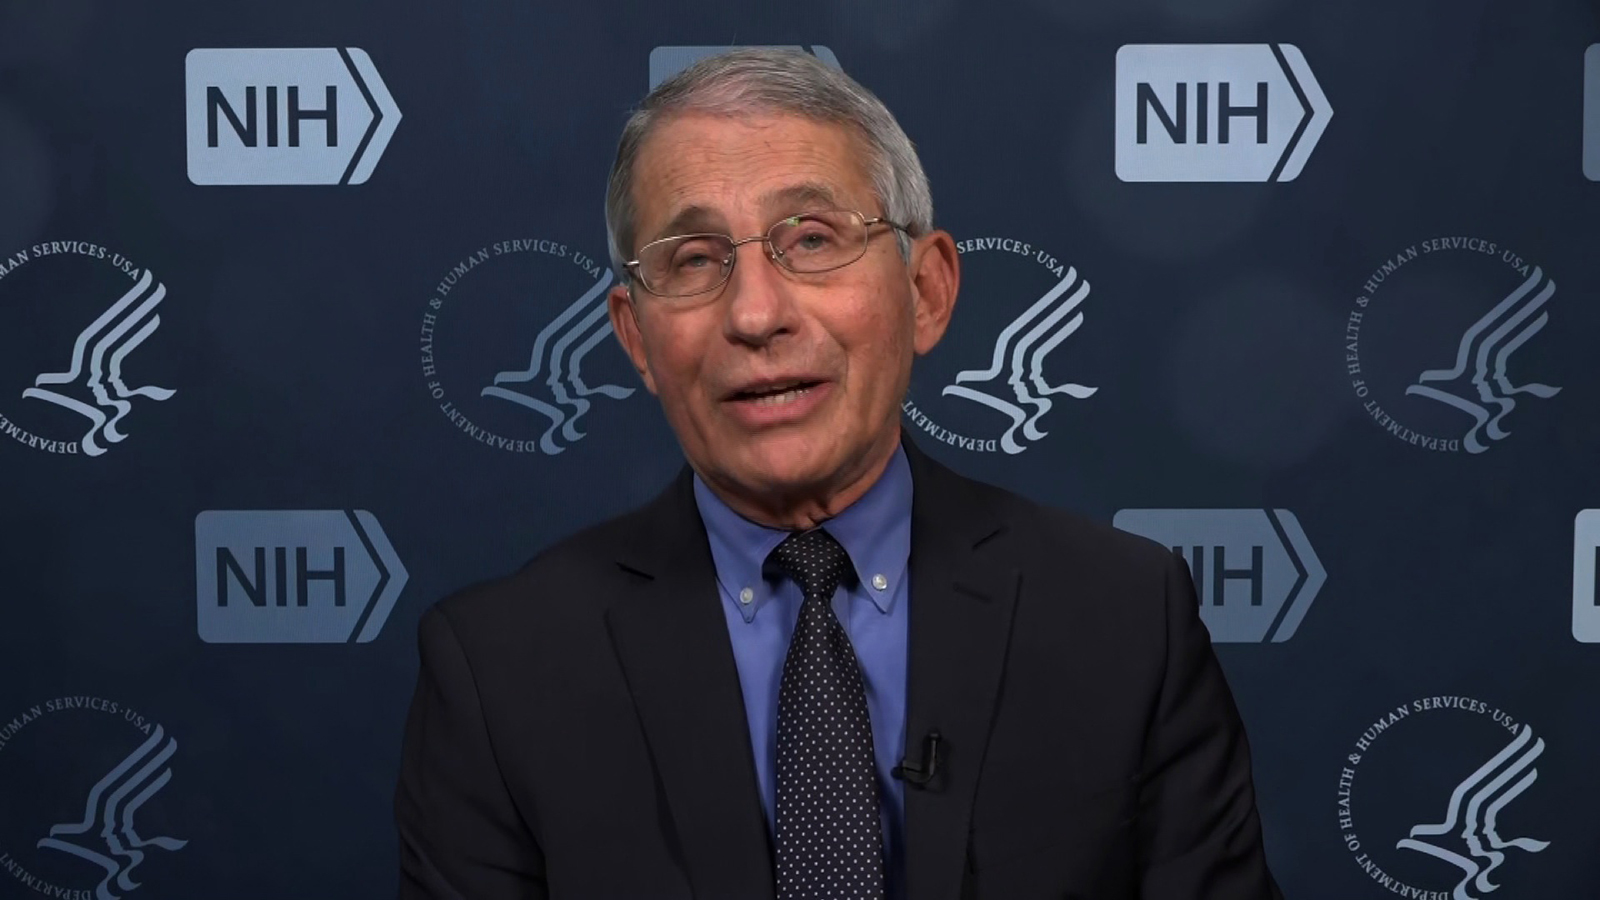 Dr. Anthony Fauci, director of the National Institute of Allergy and Infectious Diseases.